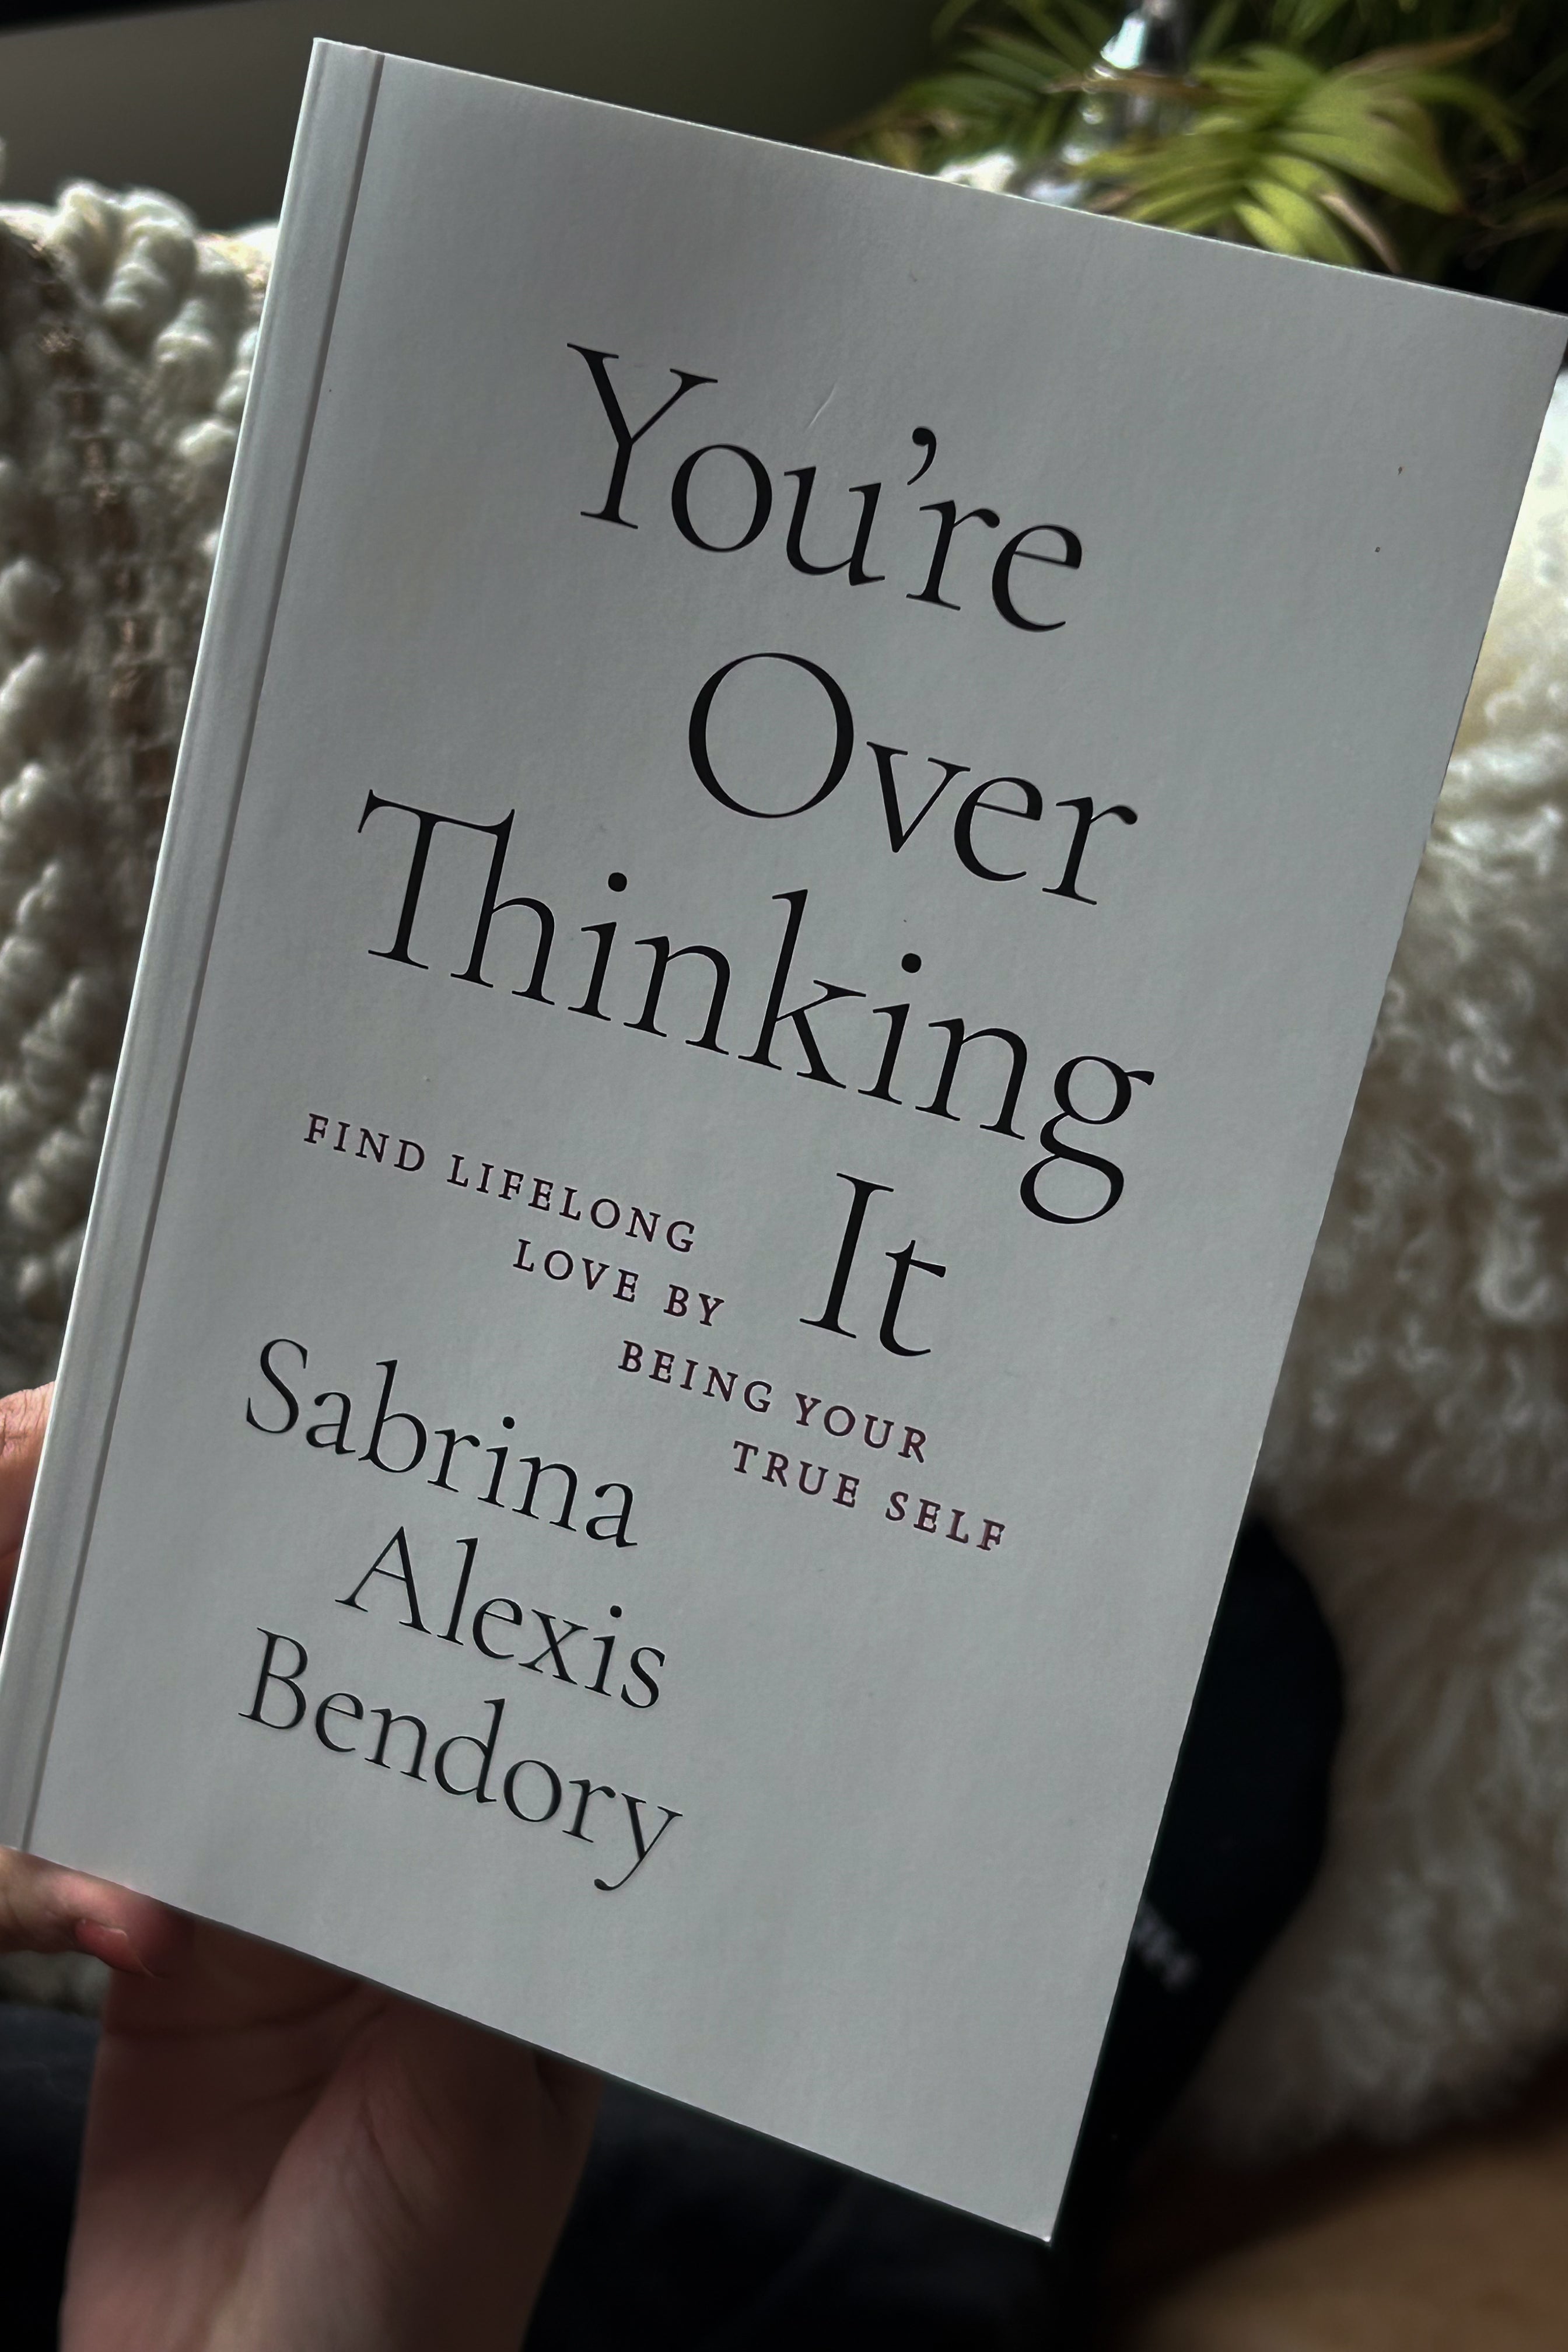 You're Overthinking It